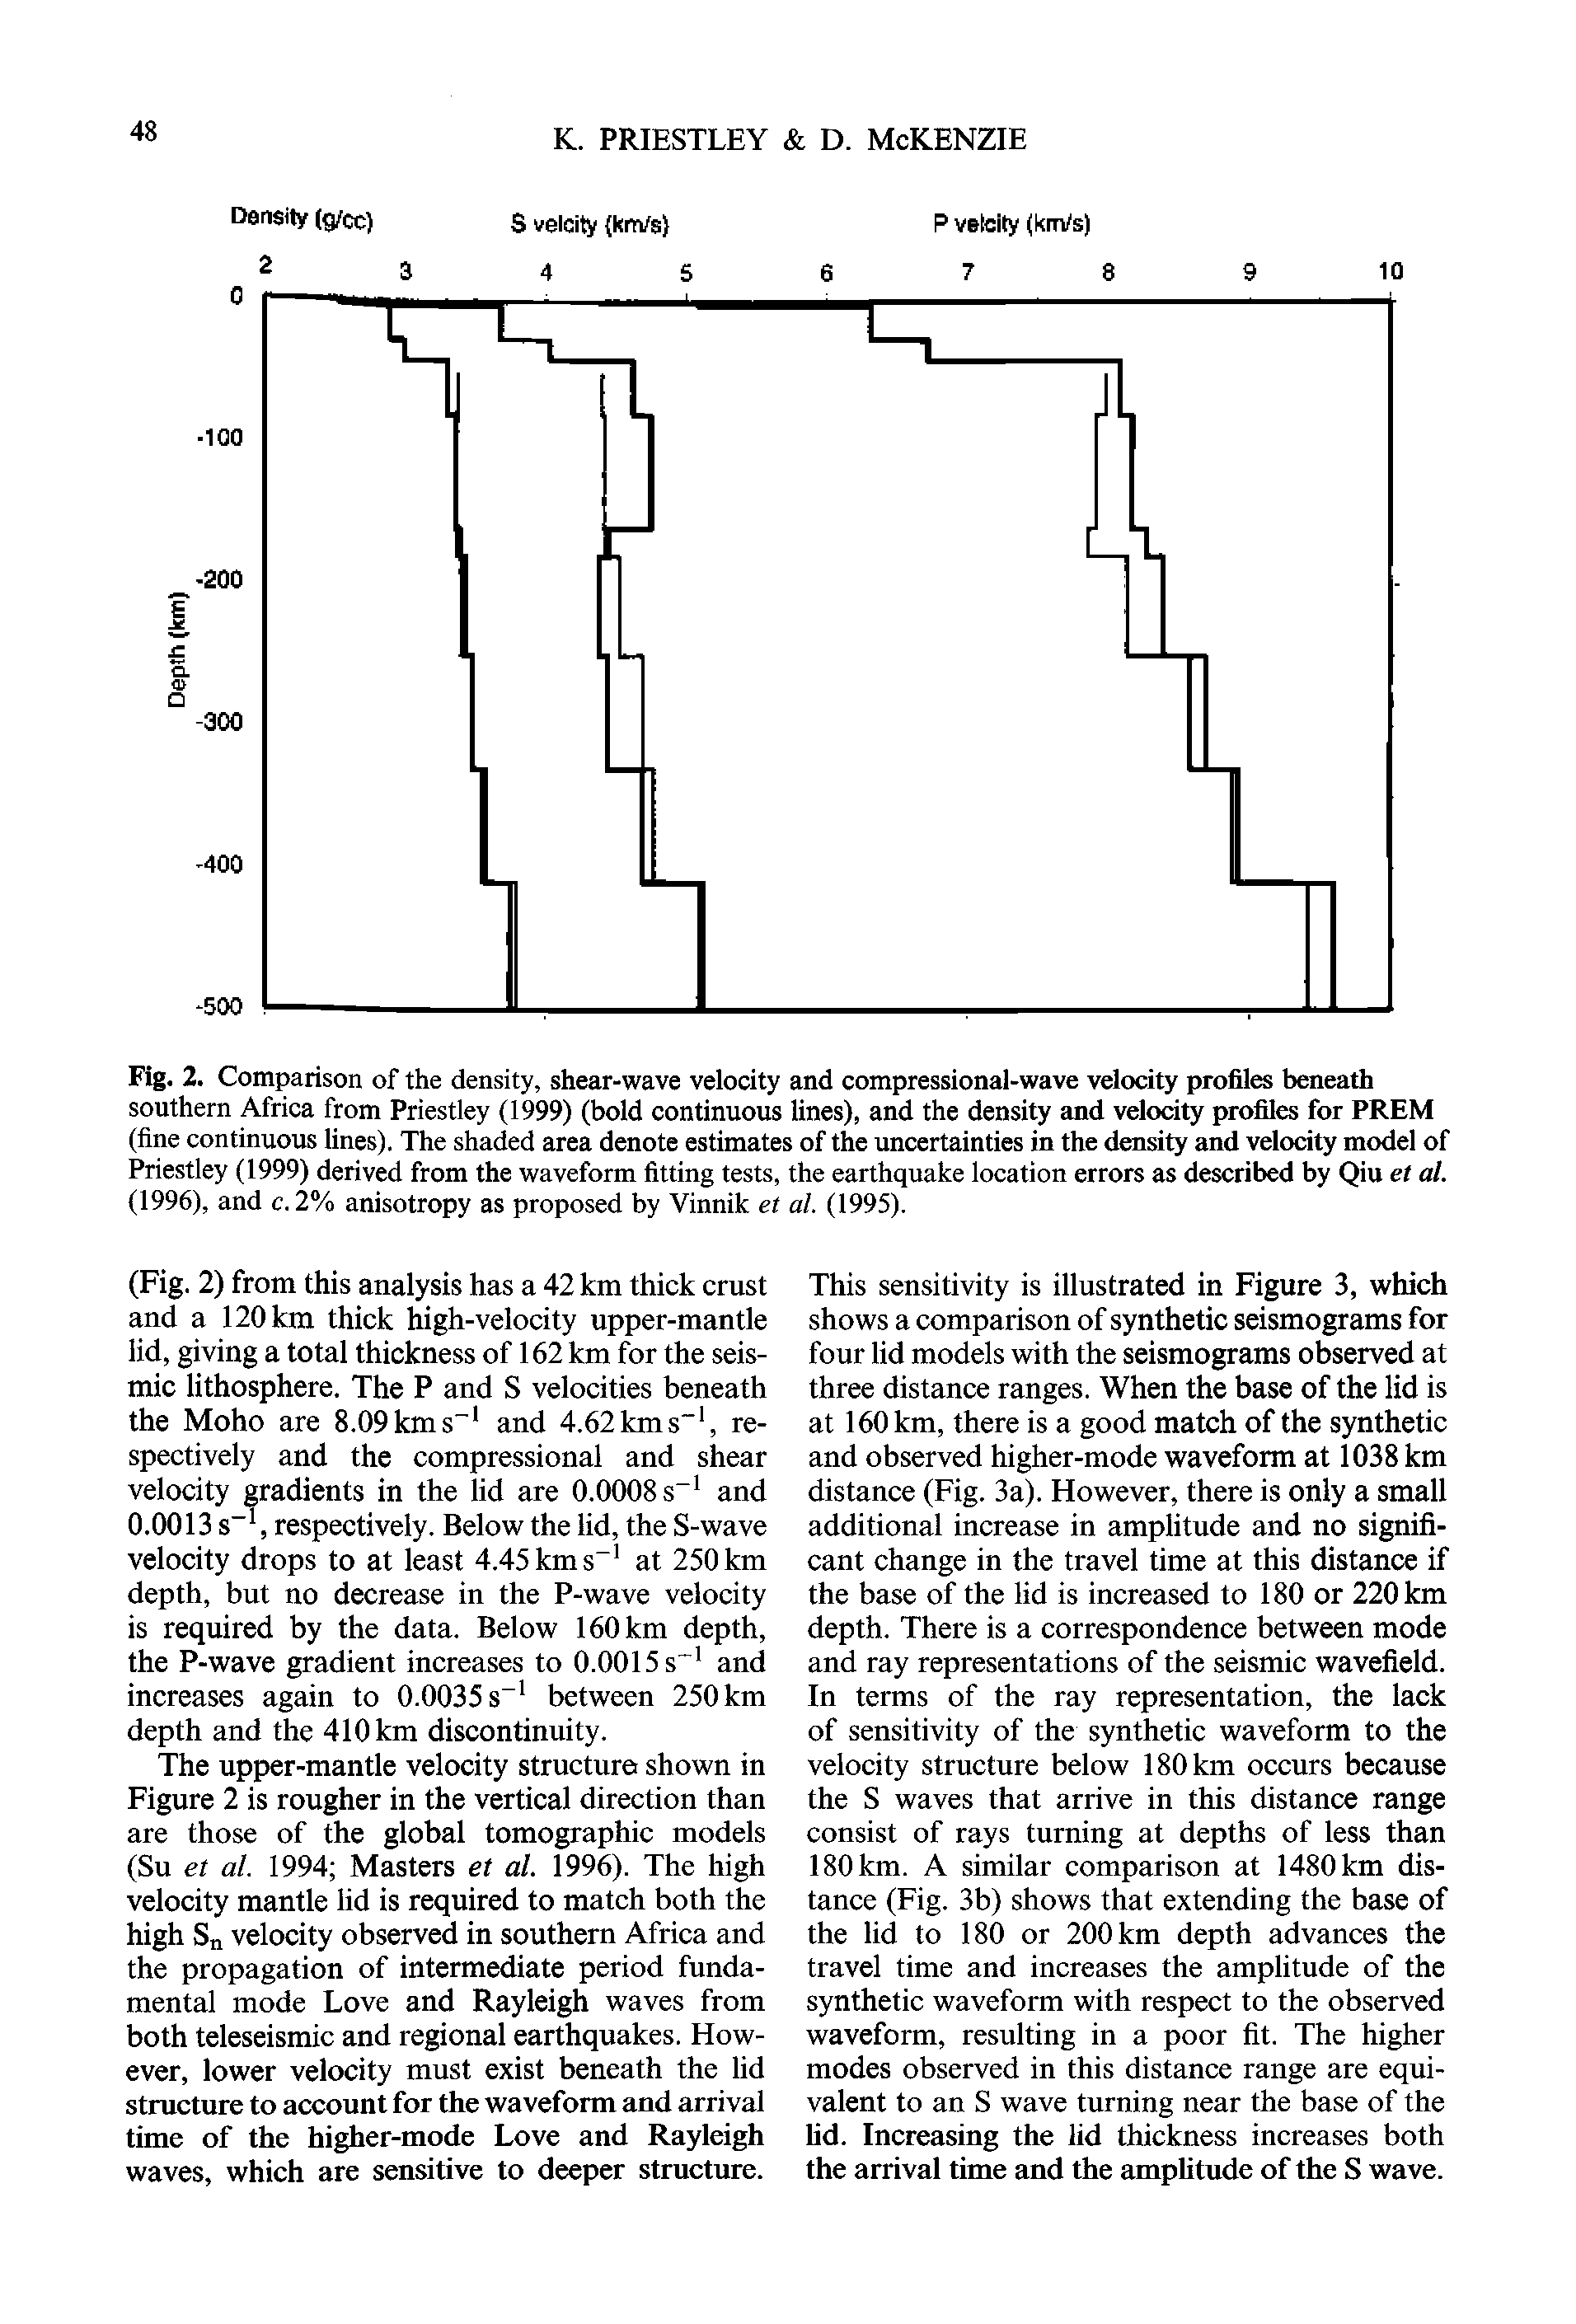 Fig. 2. Comparison of the density, shear-wave velocity and compressional-wave velocity profiles beneath southern Africa from Priestley (1999) (bold continuous lines), and the density and velocity profiles for PREM (fine continuous lines). The shaded area denote estimates of the uncertainties in the density and velocity model of Priestley (1999) derived from the waveform fitting tests, the earthquake location errors as described by Qiu et al. (1996), and c. 2% anisotropy as proposed by Vinnik et al. (1995).